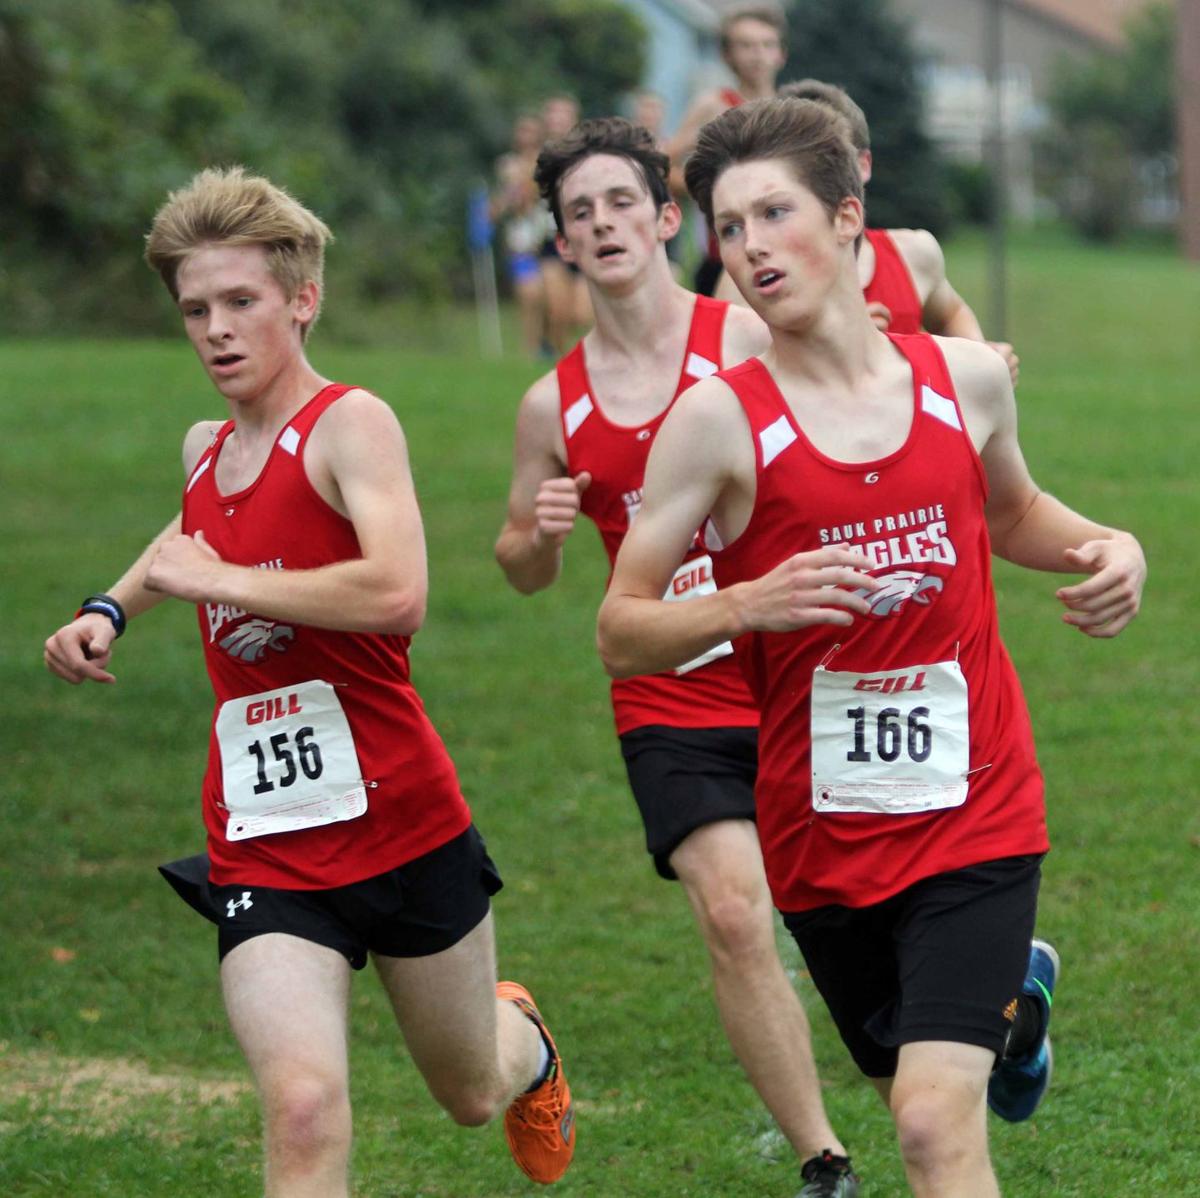 PREP CROSS COUNTRY: Baraboo girls take second, boys finish third at